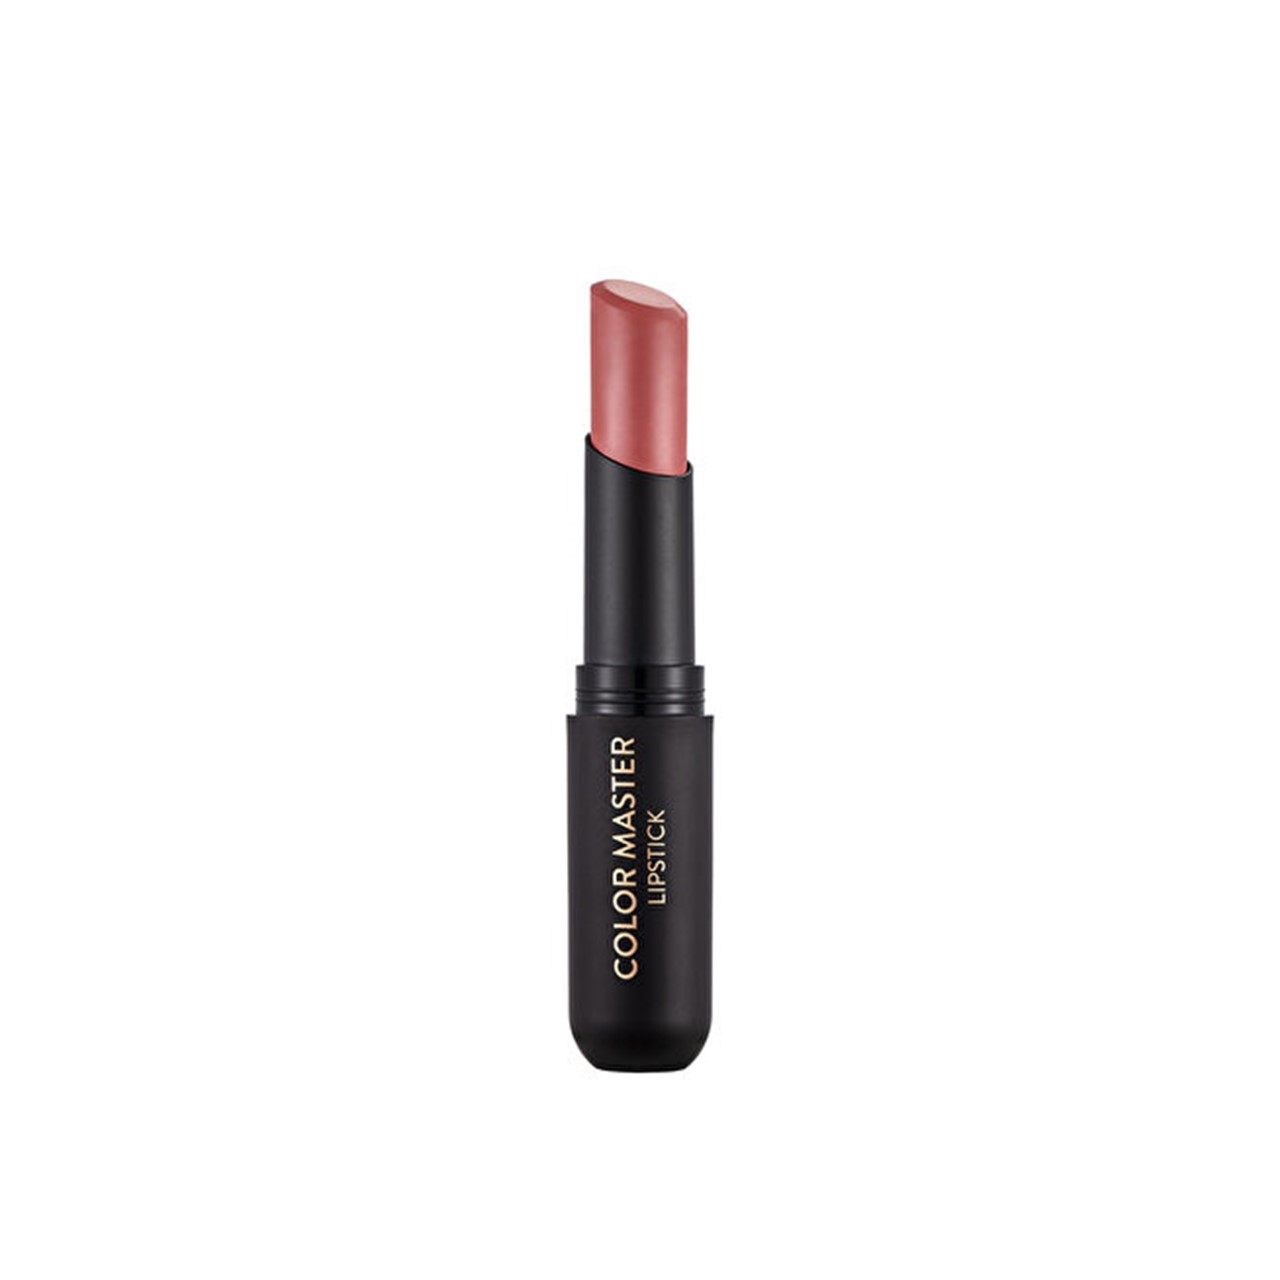 Flormar Color Master Lipstick 03 Daily Must 3g (0.11oz)